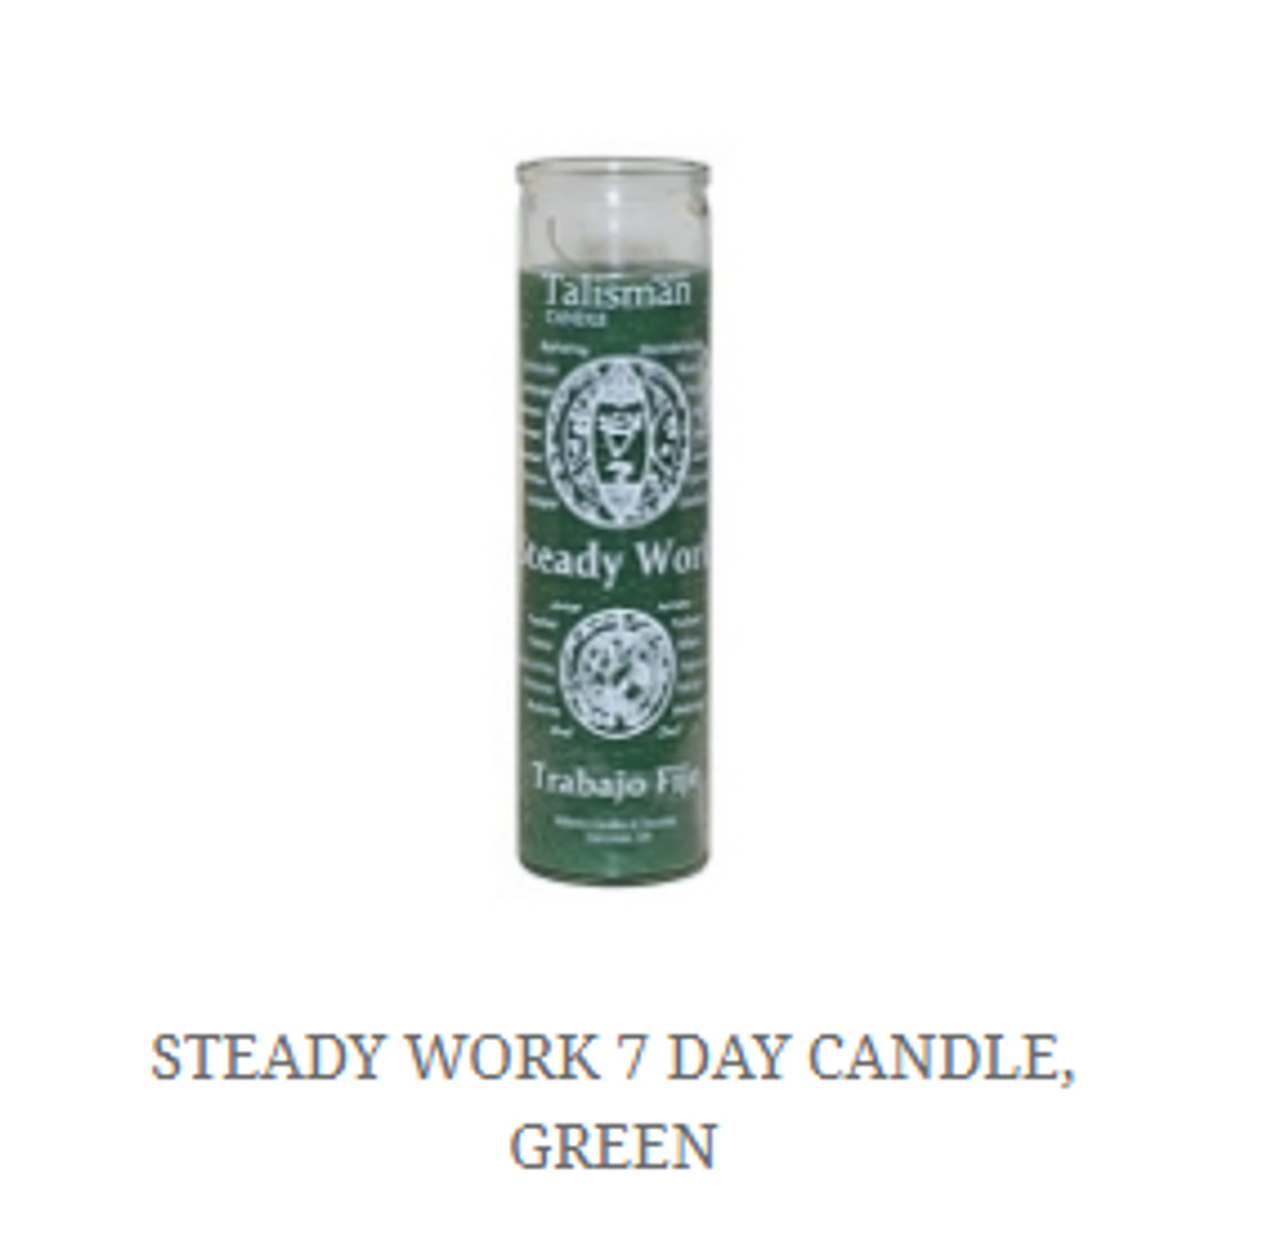 7 Day Candle Steady Work Green